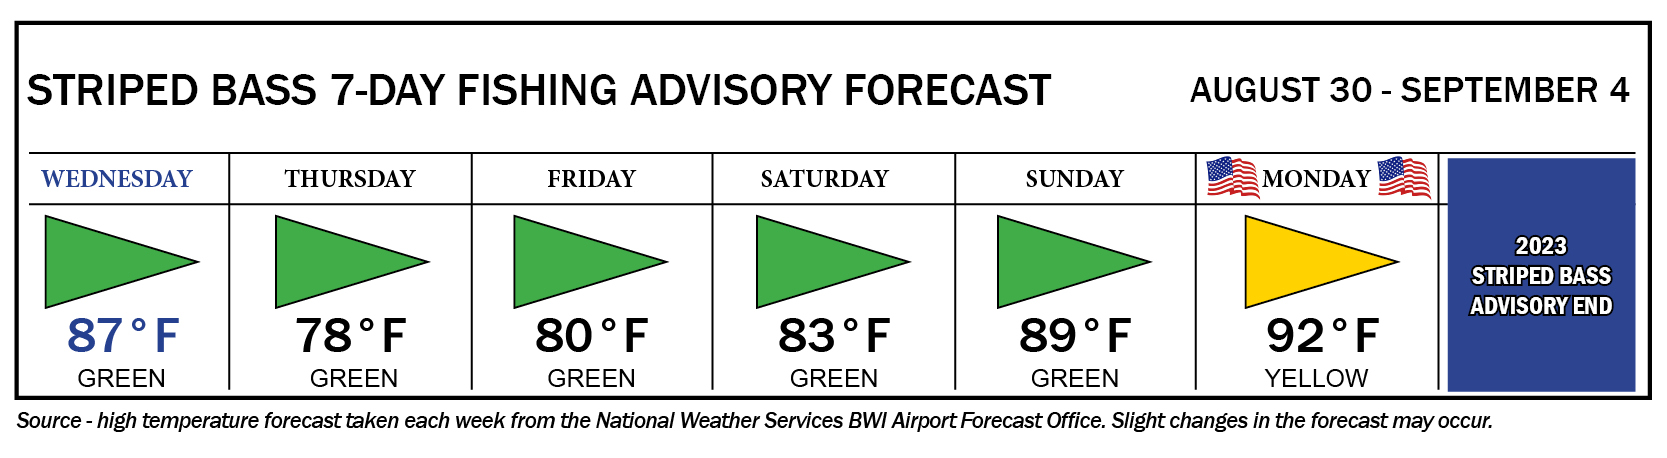 Image of weekly forecast August 23-29, featuring green flag fishing days Wednesday through Sunday, yellow flag on Monday, and end of the summer advisories on Tuesday